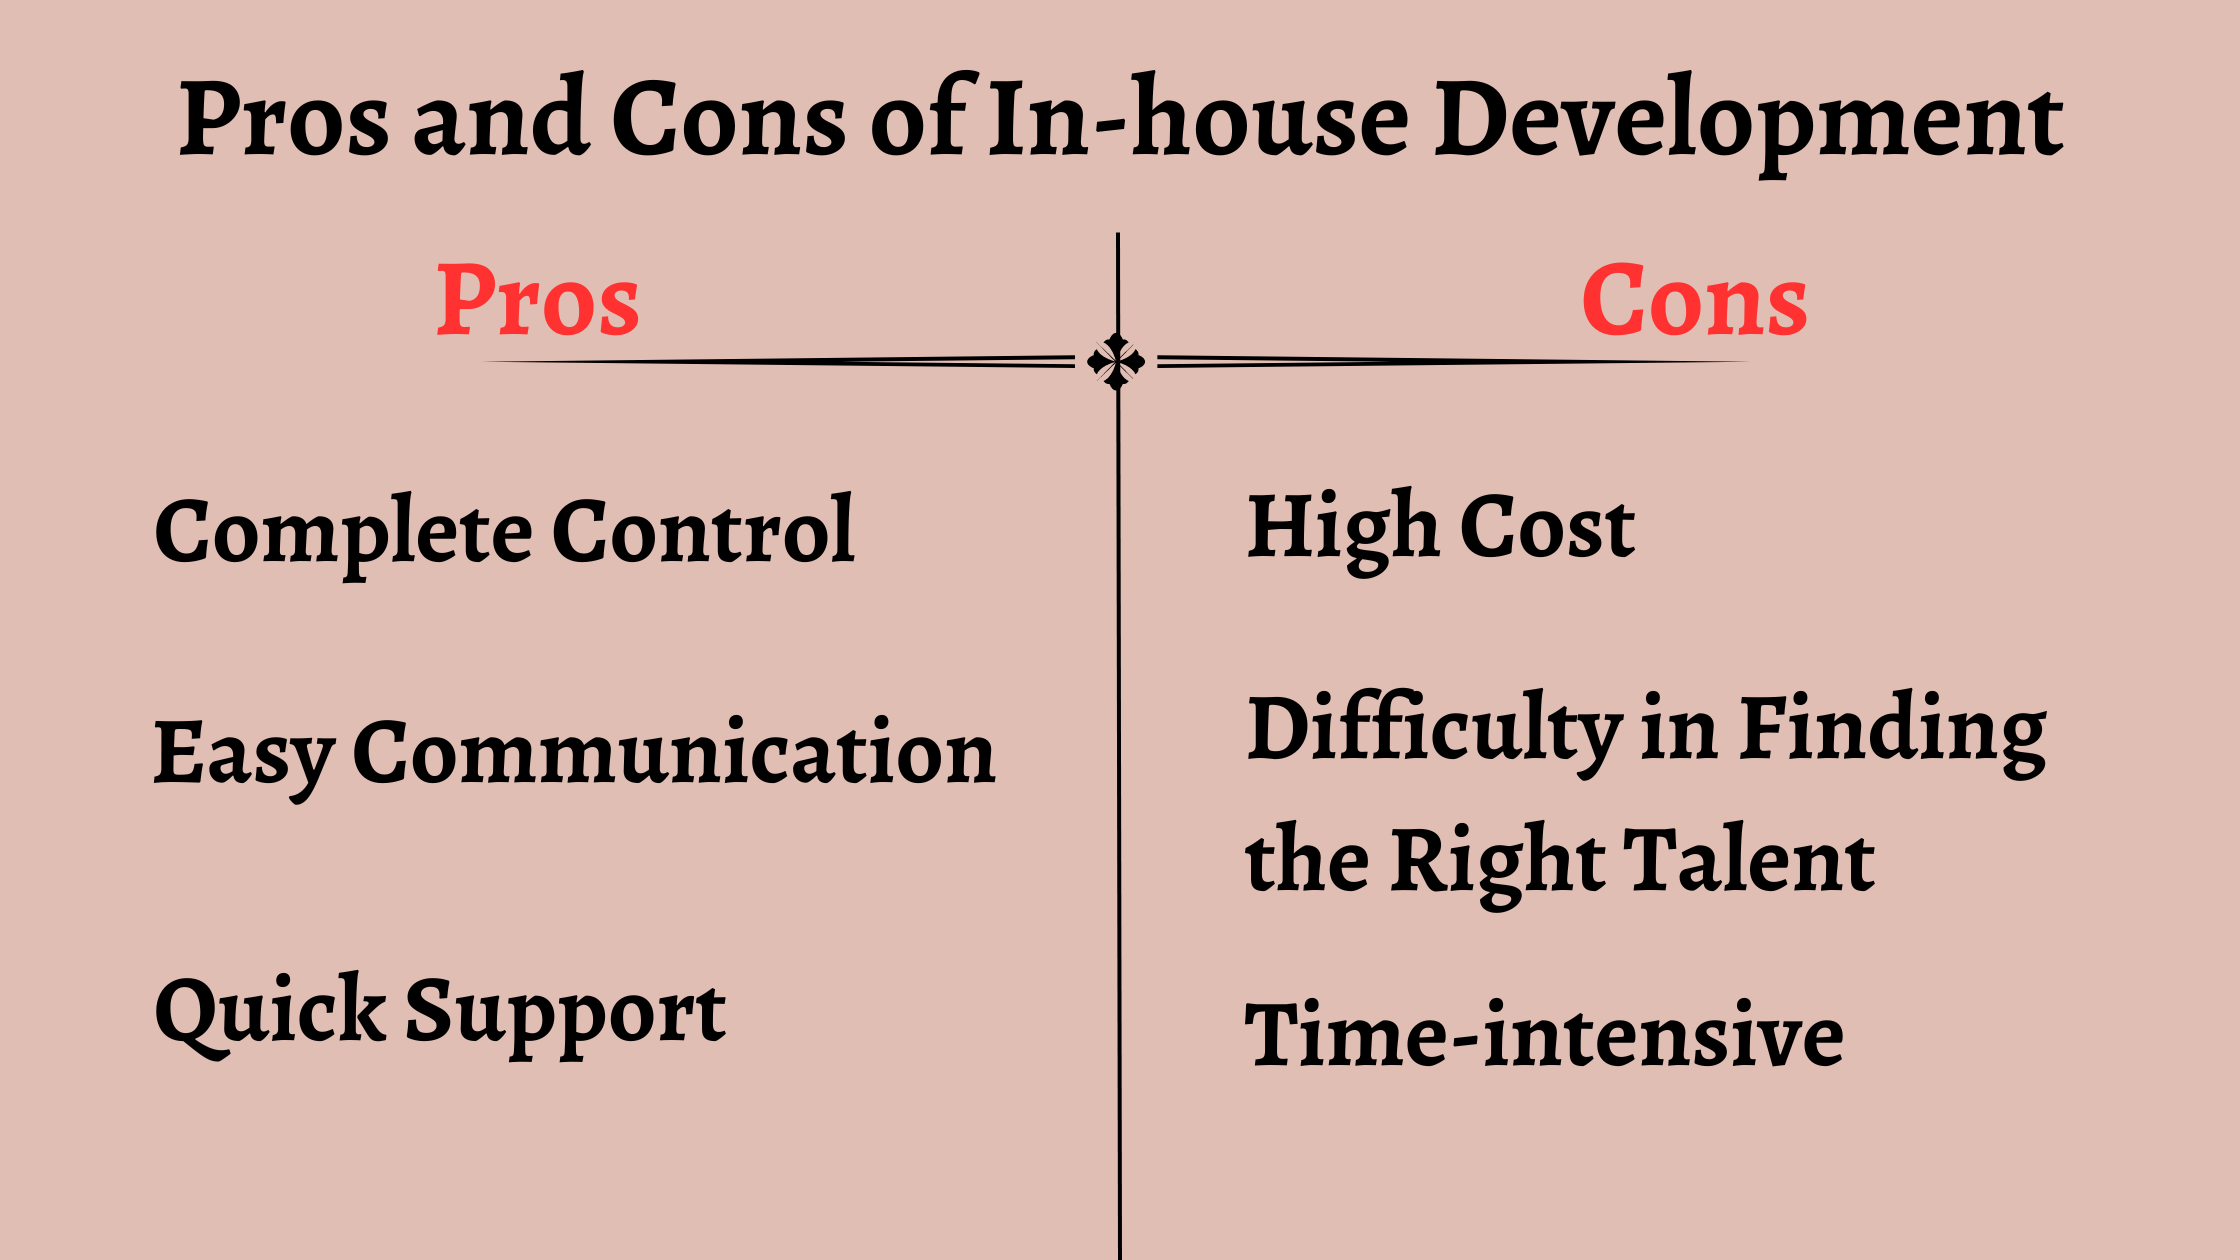 Pros and Cons of In-house Development